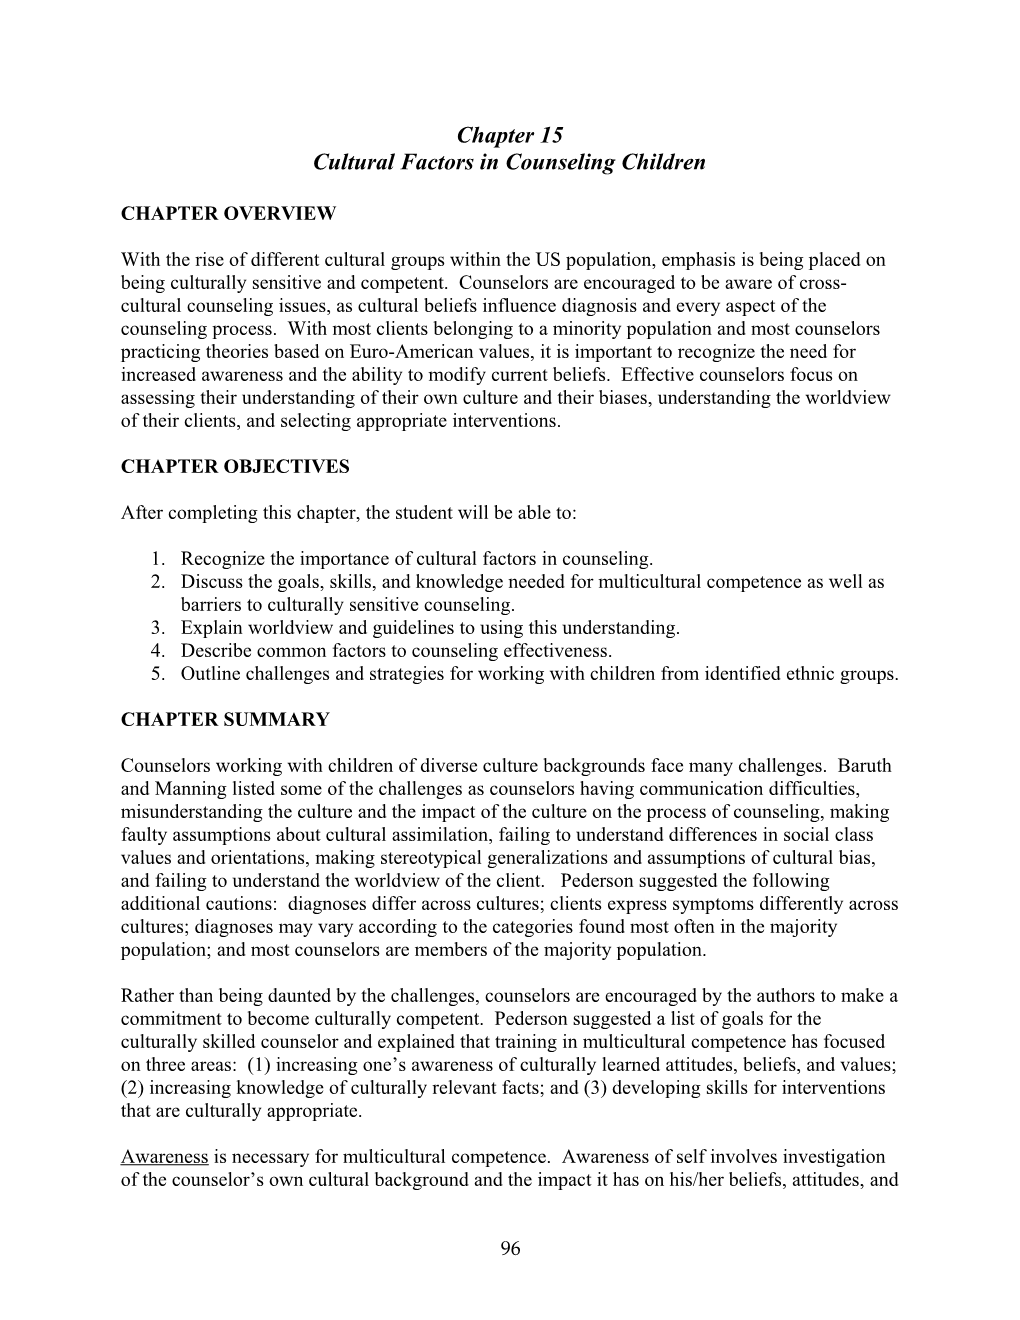 Cultural Factors in Counseling Children